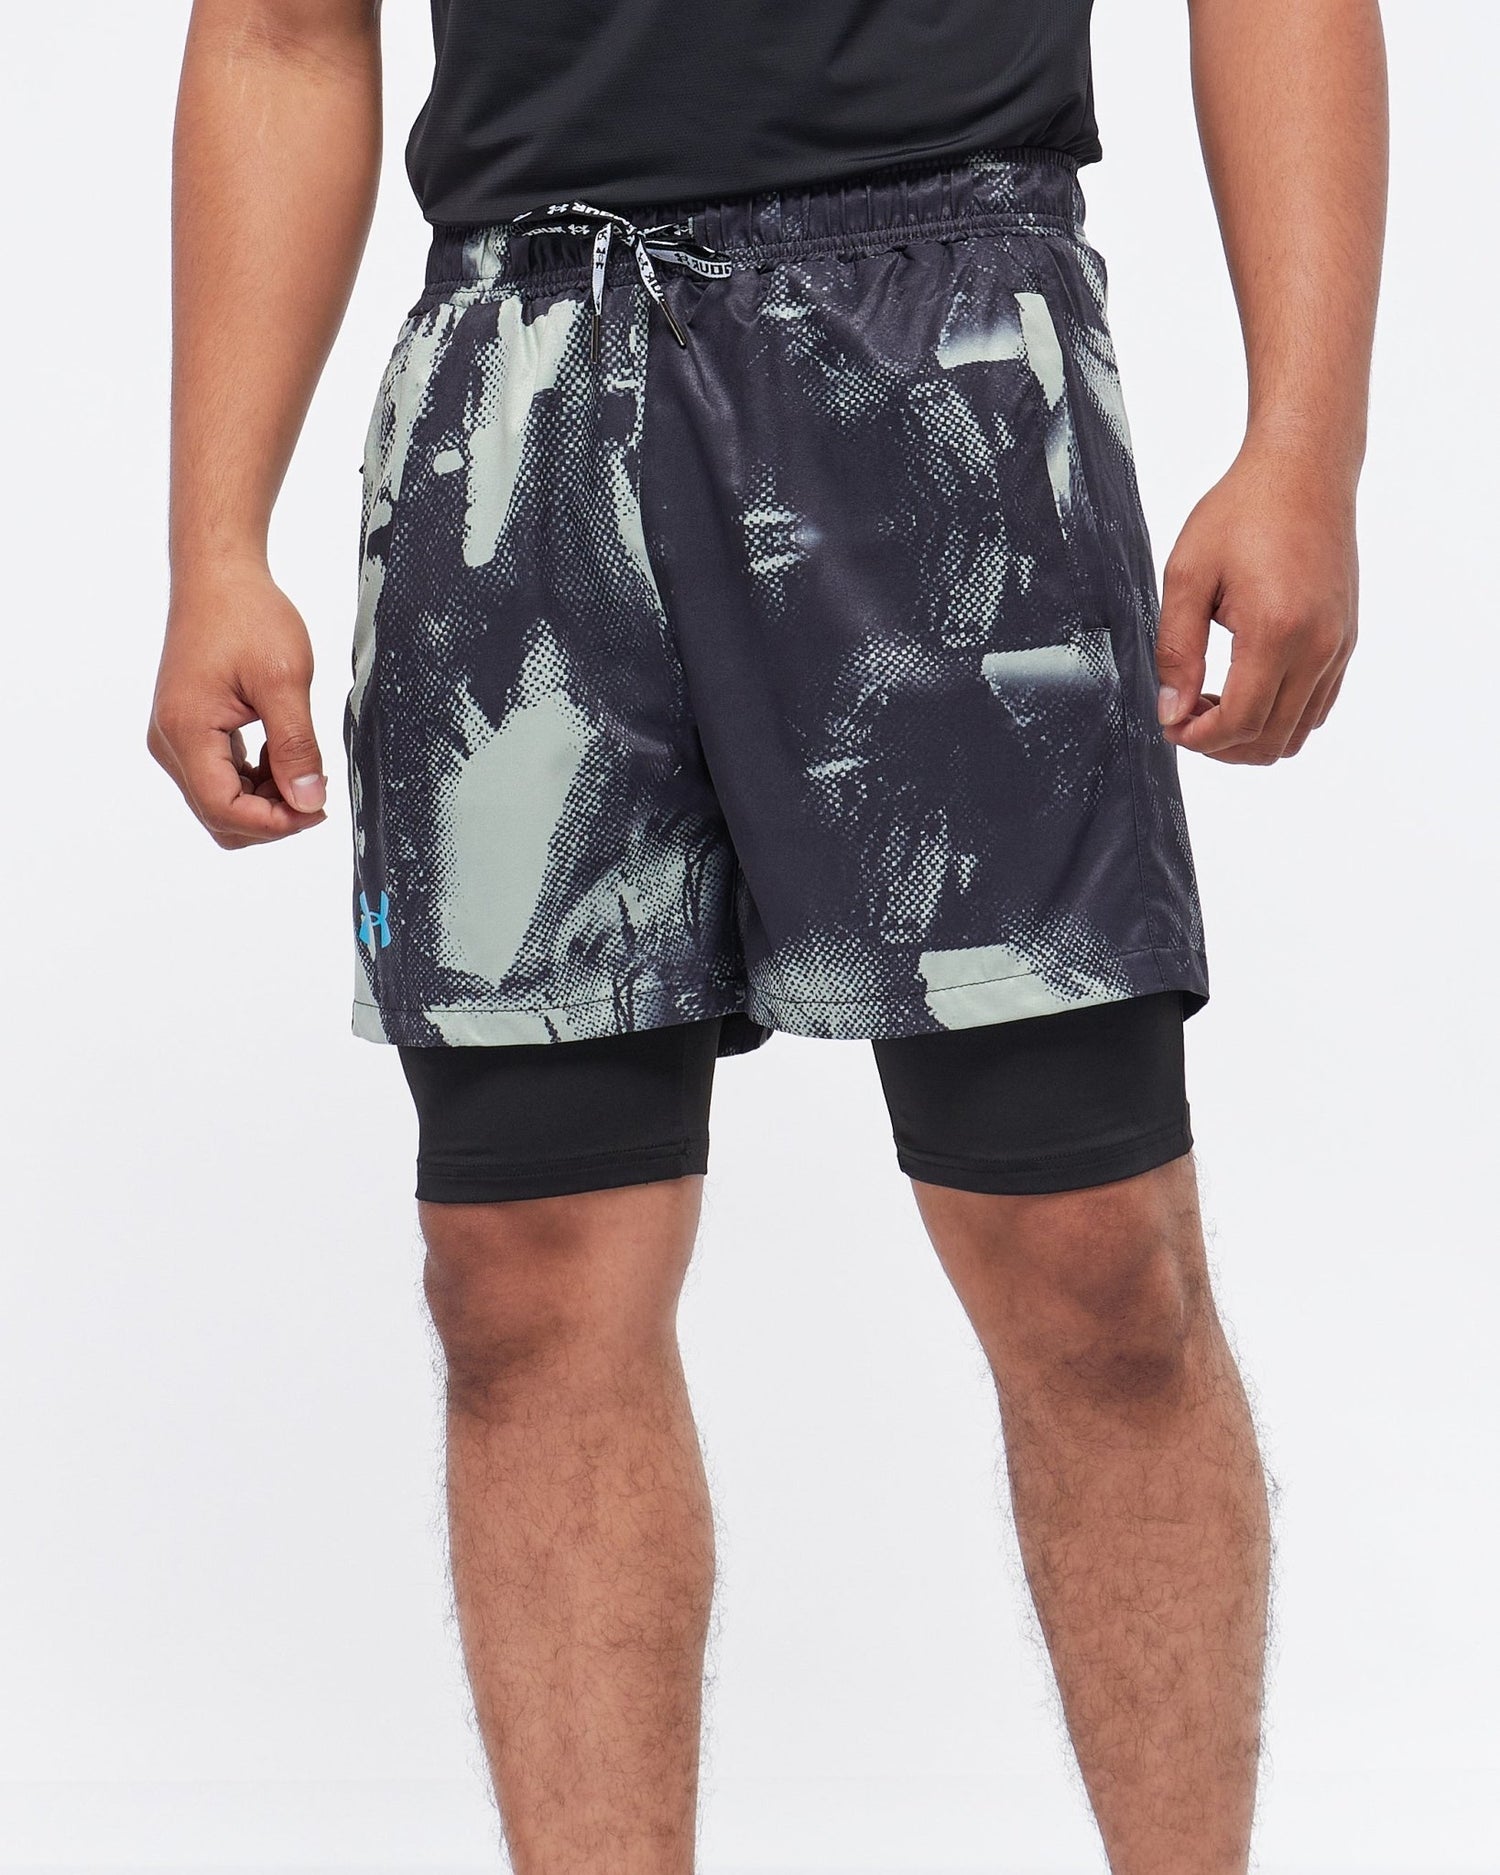 MOI OUTFIT-UA Camo Printed 2 in 1 Men Sport Shorts 14.90